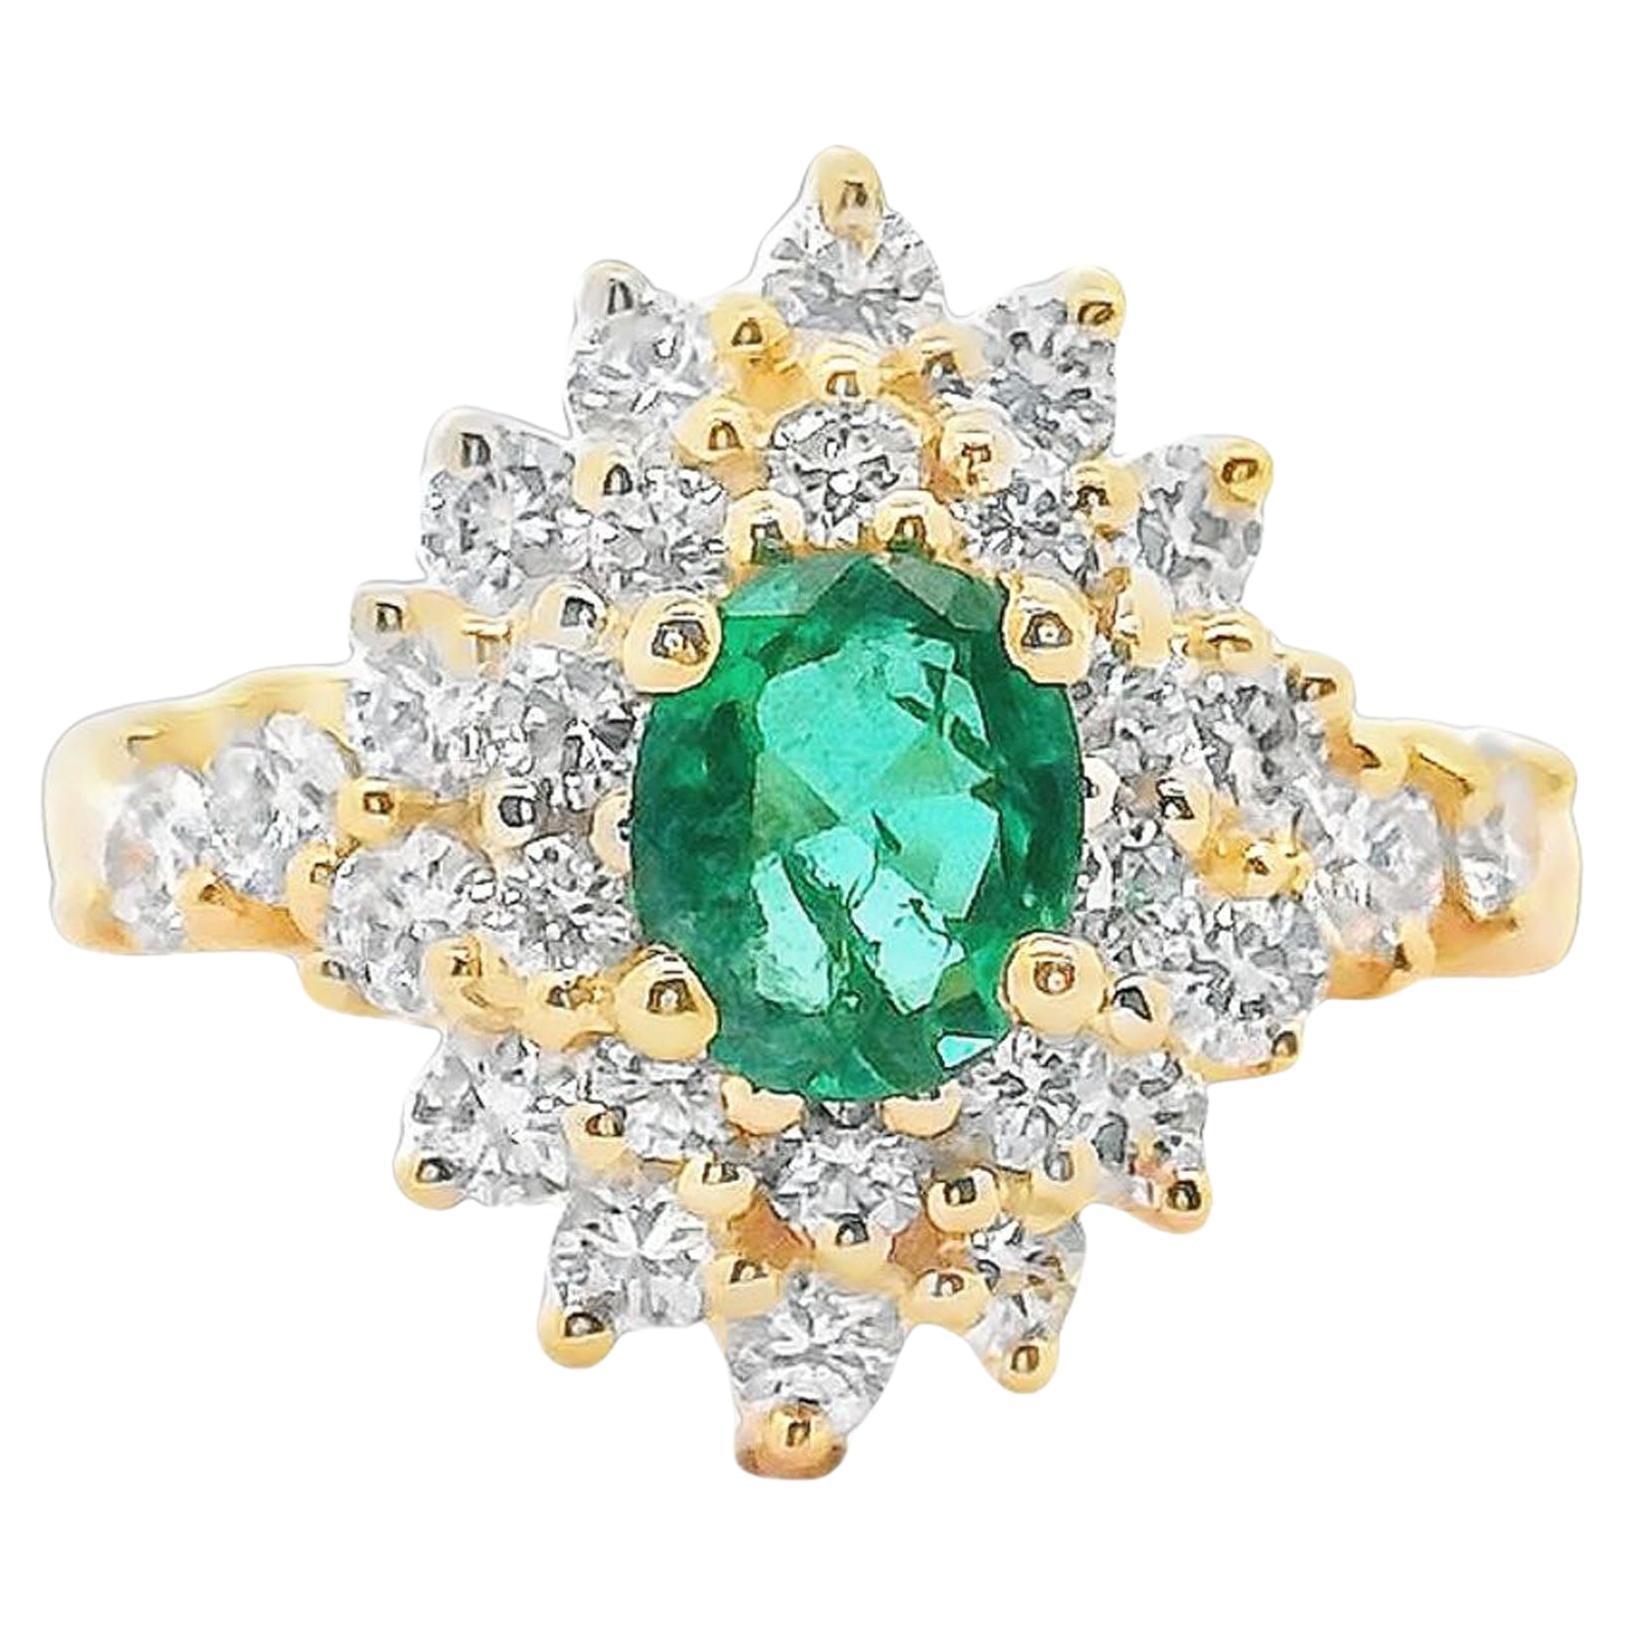 Preowned 14K Yellow Gold Emerald and Diamond Ring